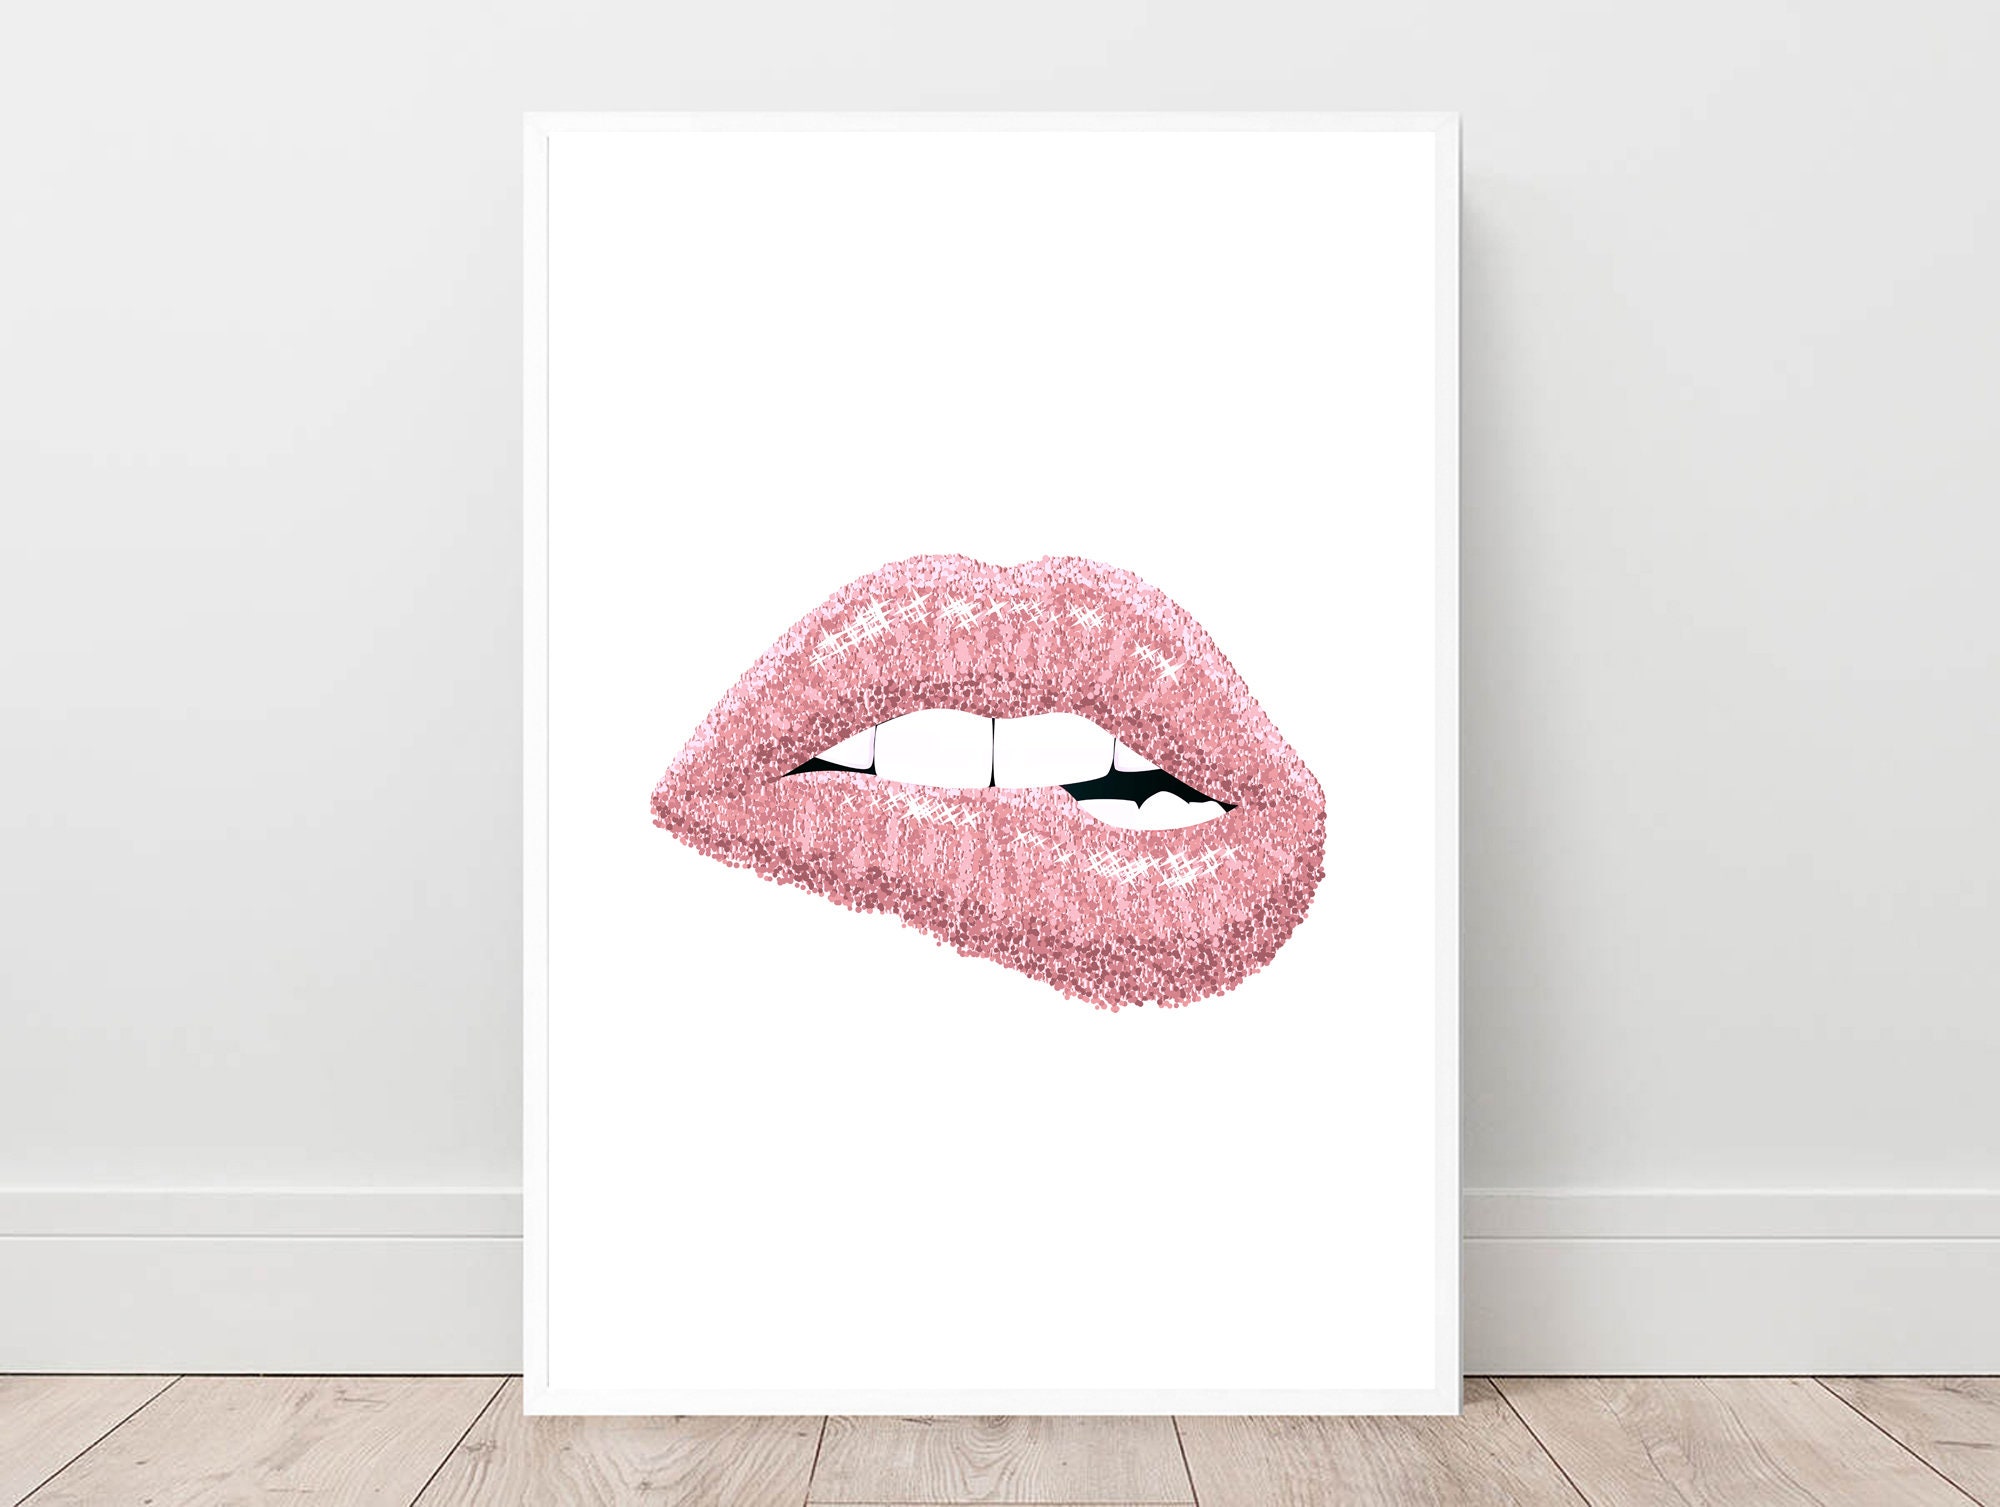 Venice Beach Collection's Hot Pink Glam Lips 14x18 Framed Print